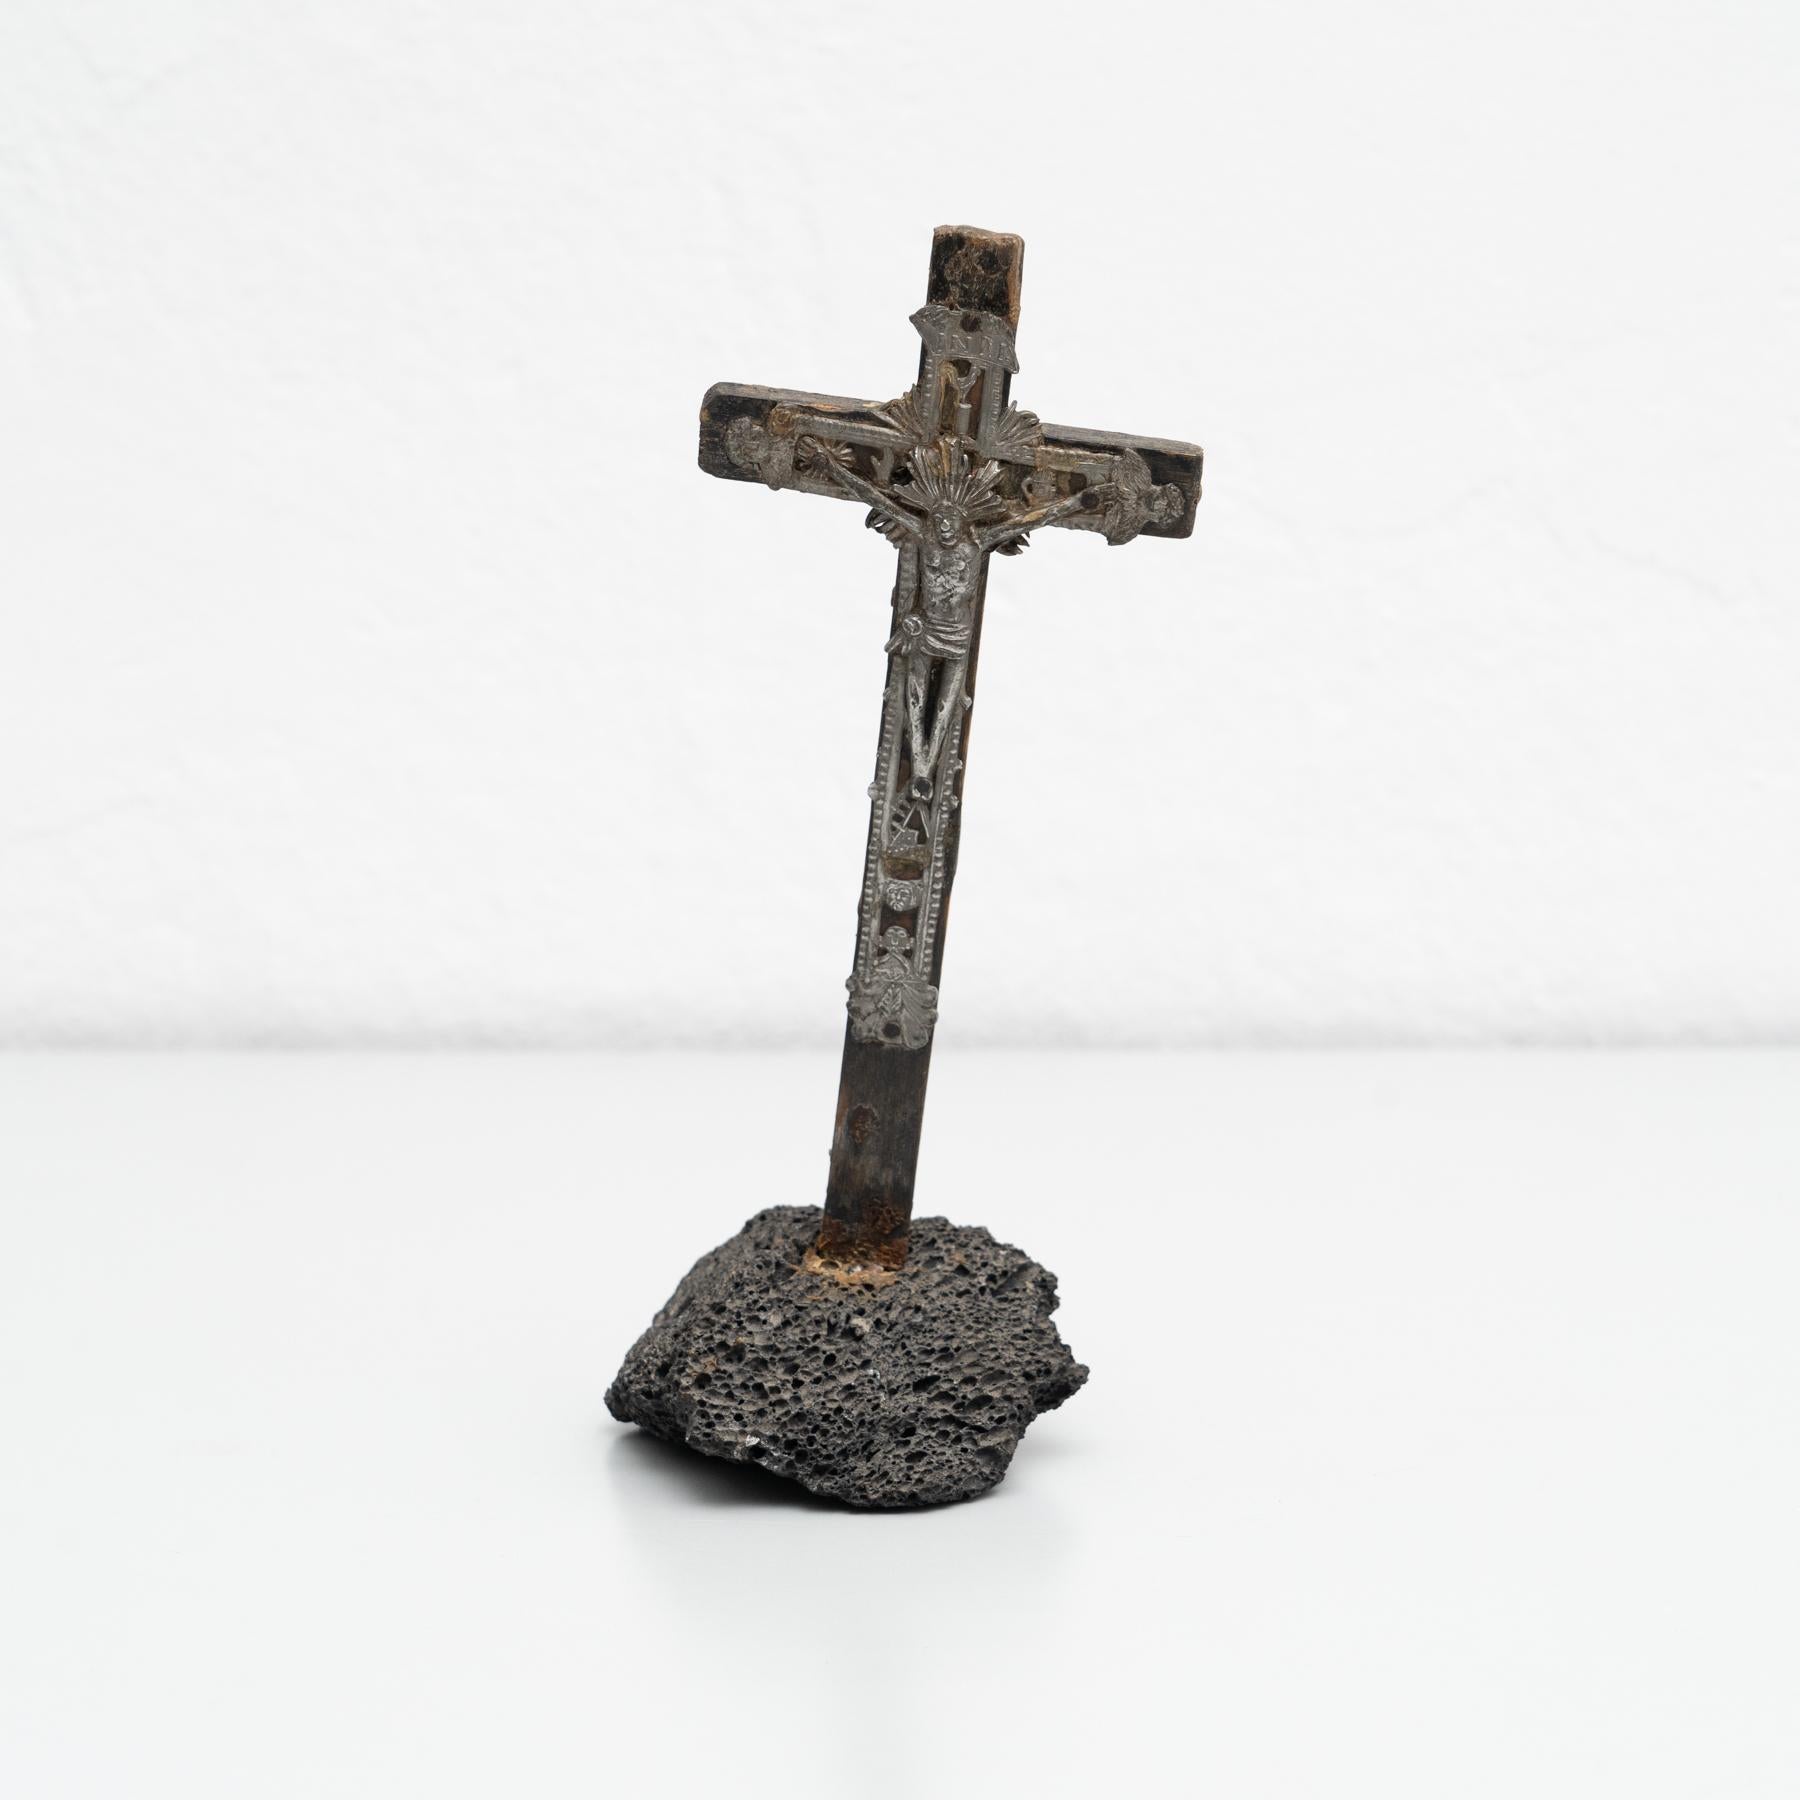 Jesus in the cross metal souvenir.

Made France, circa 1950.

In original condition, with minor wear consistent with age and use, preserving a beautiful patina.

Materials:
Metal.
 